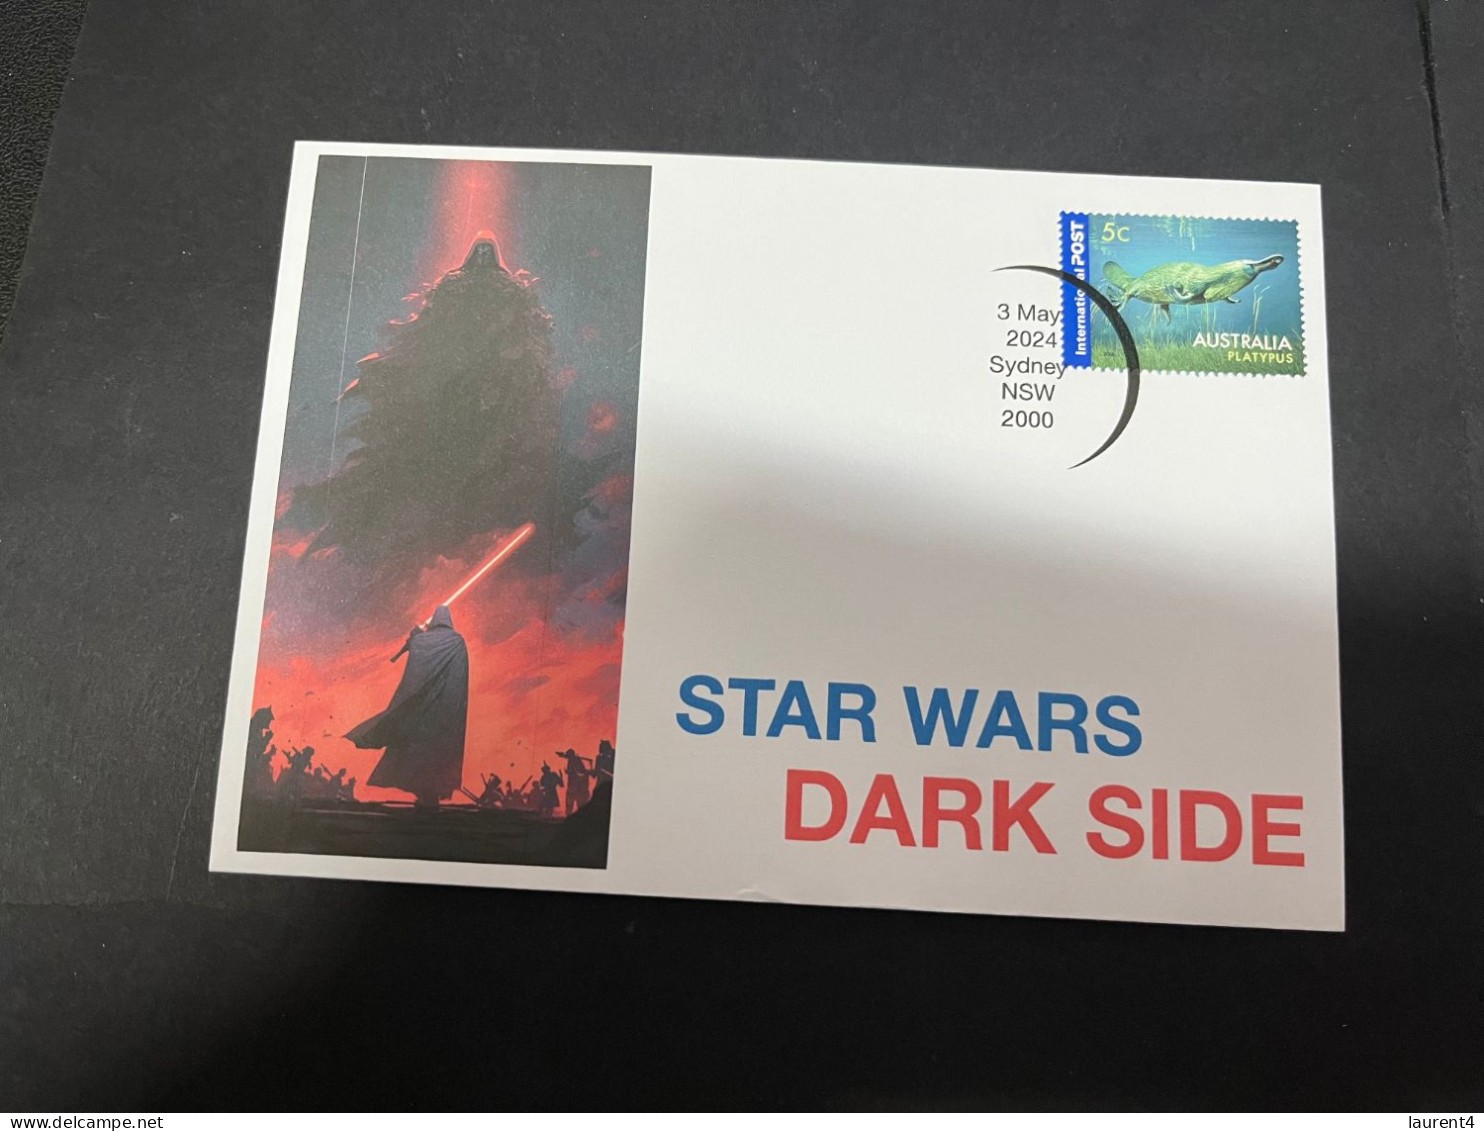 10-5-2024 (4 Z 37) Star Wars - Dark Side - 2 Covers (with Platypus Stamp) - Used Stamps